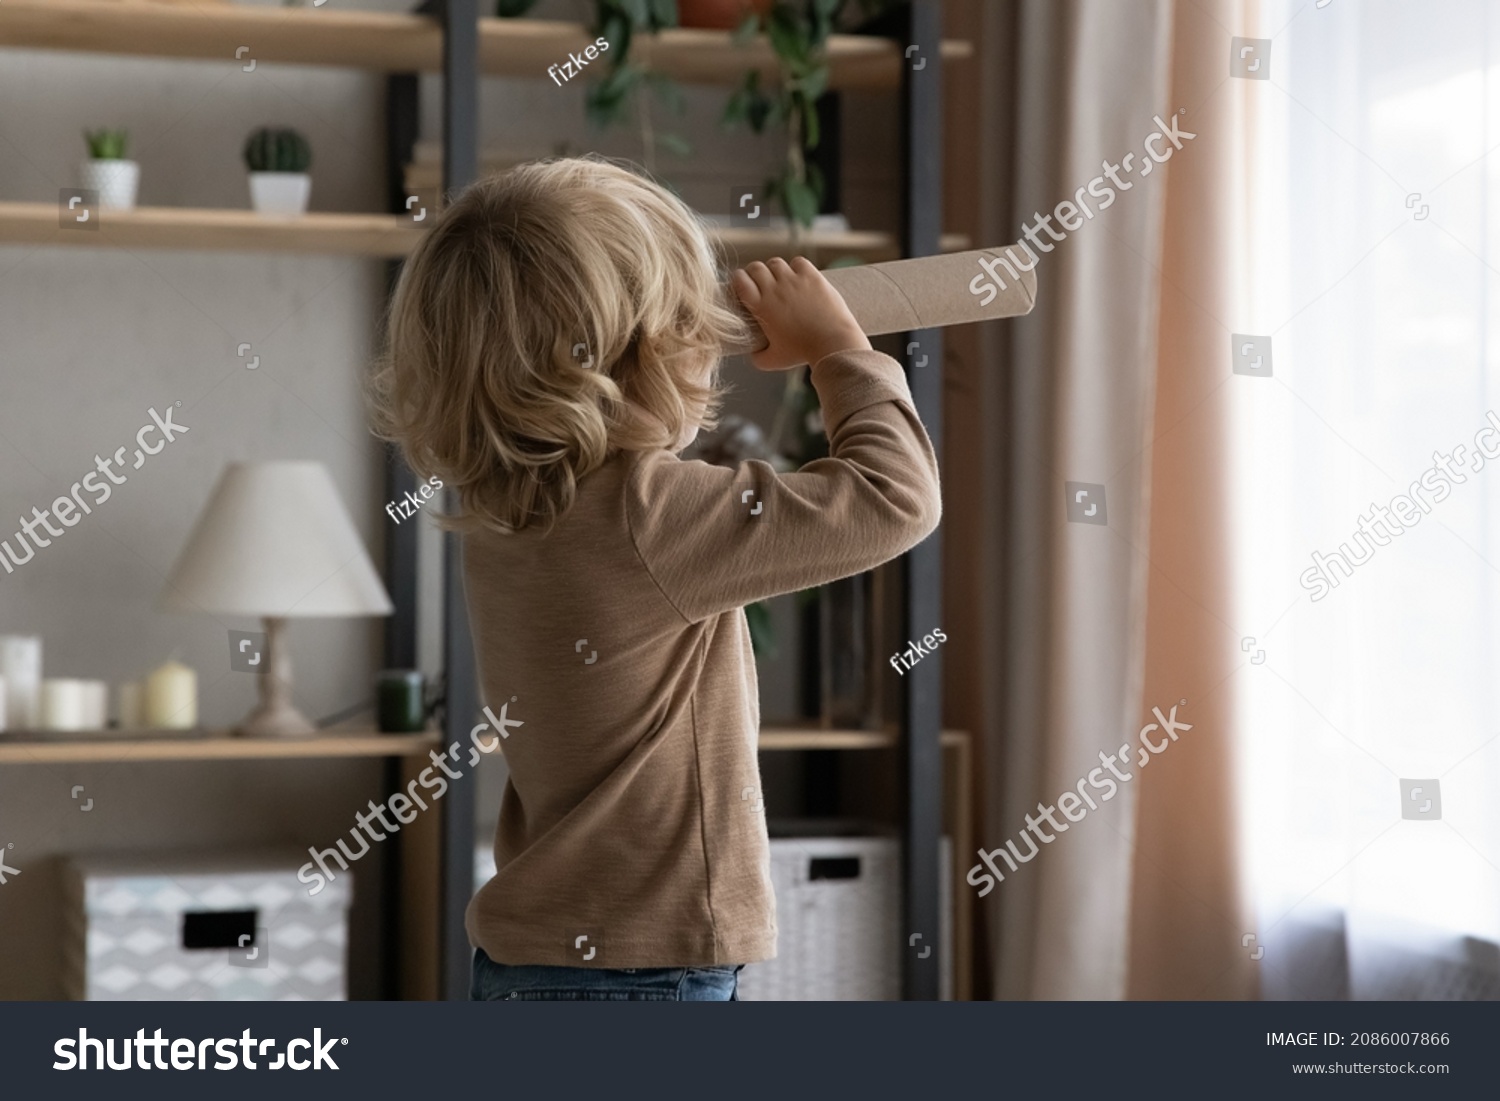 Little preschool adorable boy holding toy cardboard spyglass, looking forward at window at home. Sweet kid playing game with paper homemade craft tube telescope, having fun, imagining adventures #2086007866